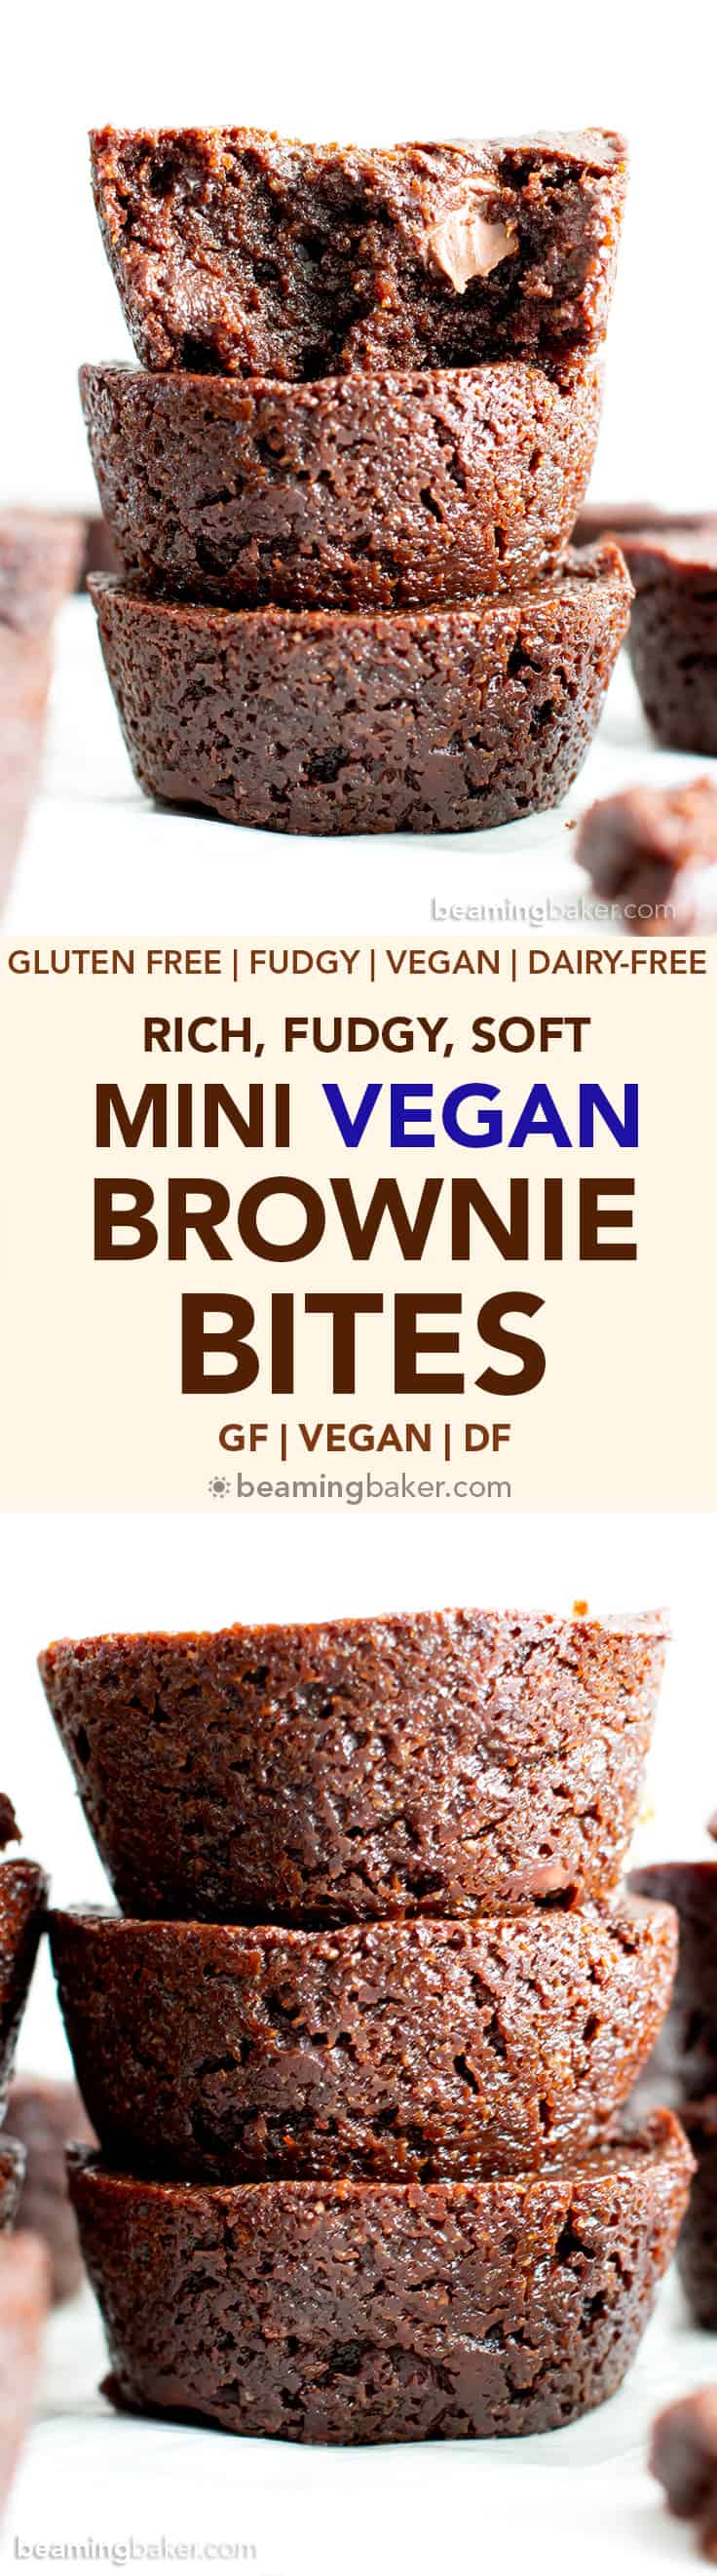 Mini Vegan Brownie Bites Recipe (V, GF): an easy recipe for soft, fudgy ‘n moist two bite mini brownies bursting with rich, chocolate flavor. Made with healthy, whole ingredients. #Vegan #GlutenFree #DairyFree #Brownies #VeganBaking #Chocolate | Recipe at BeamingBaker.com